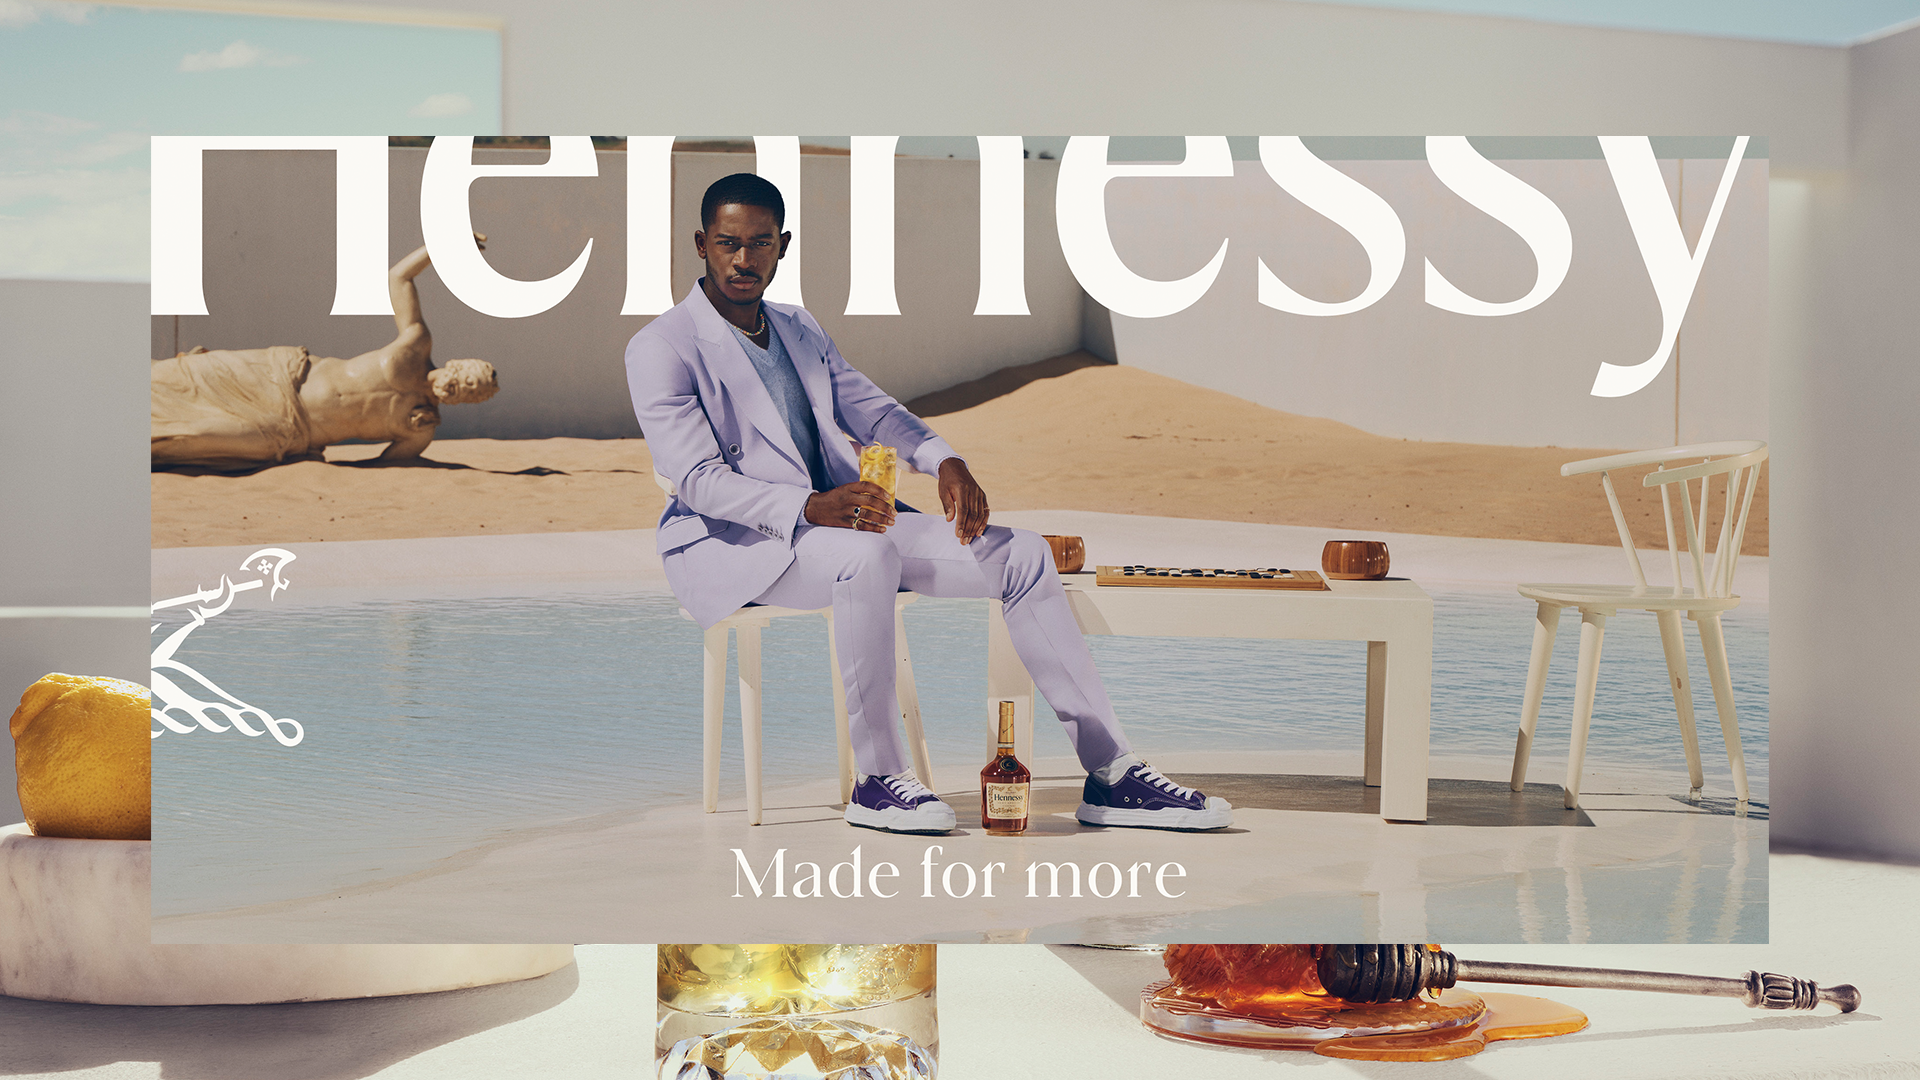 Man in a suit sitting by a pool with a glass and bottle of Hennessy, desert backdrop, ad text overlay